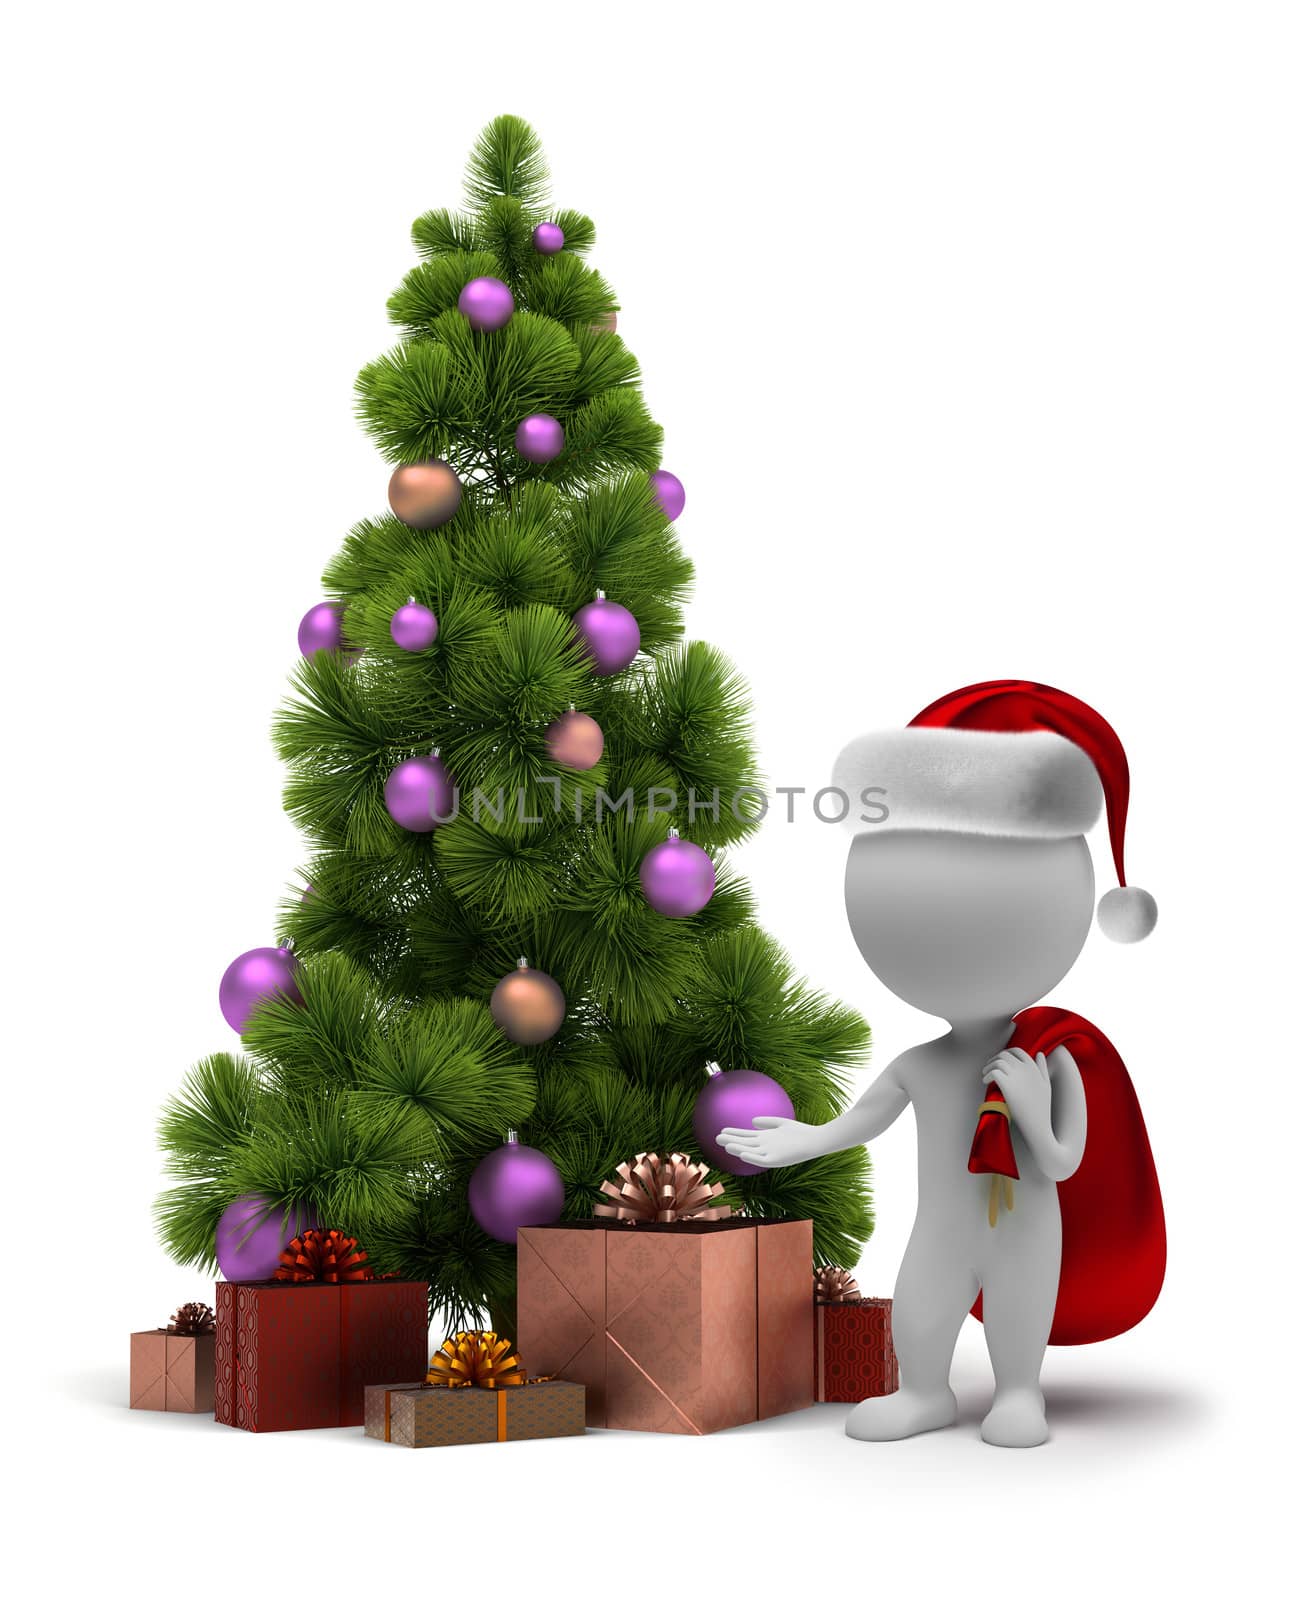 3d small people - Santa Claus and a Christmas tree. 3d image. Isolated white background.